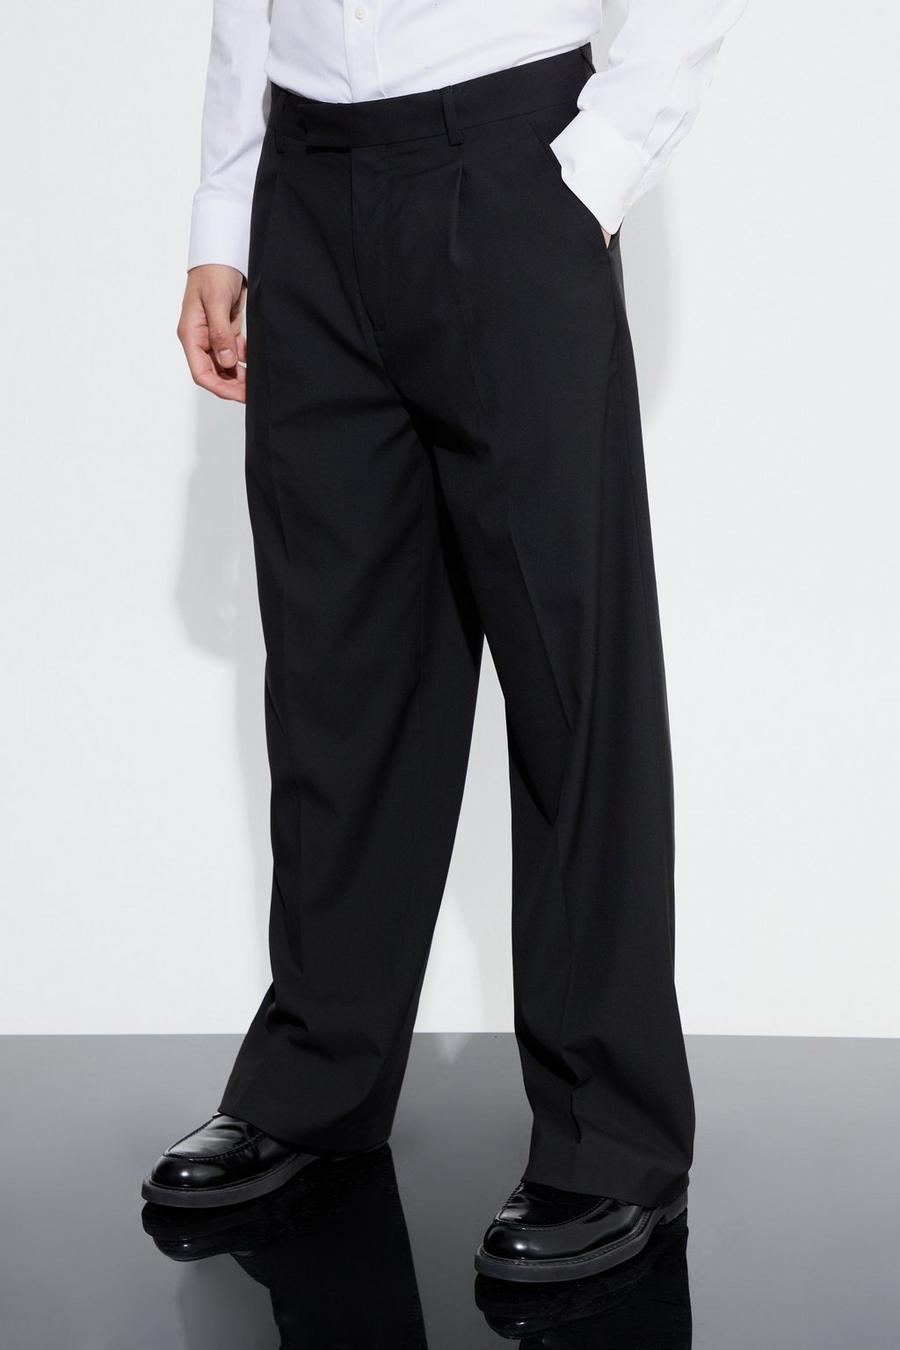 Men's Pleated Trousers  Mens High Waisted Pleated Trousers